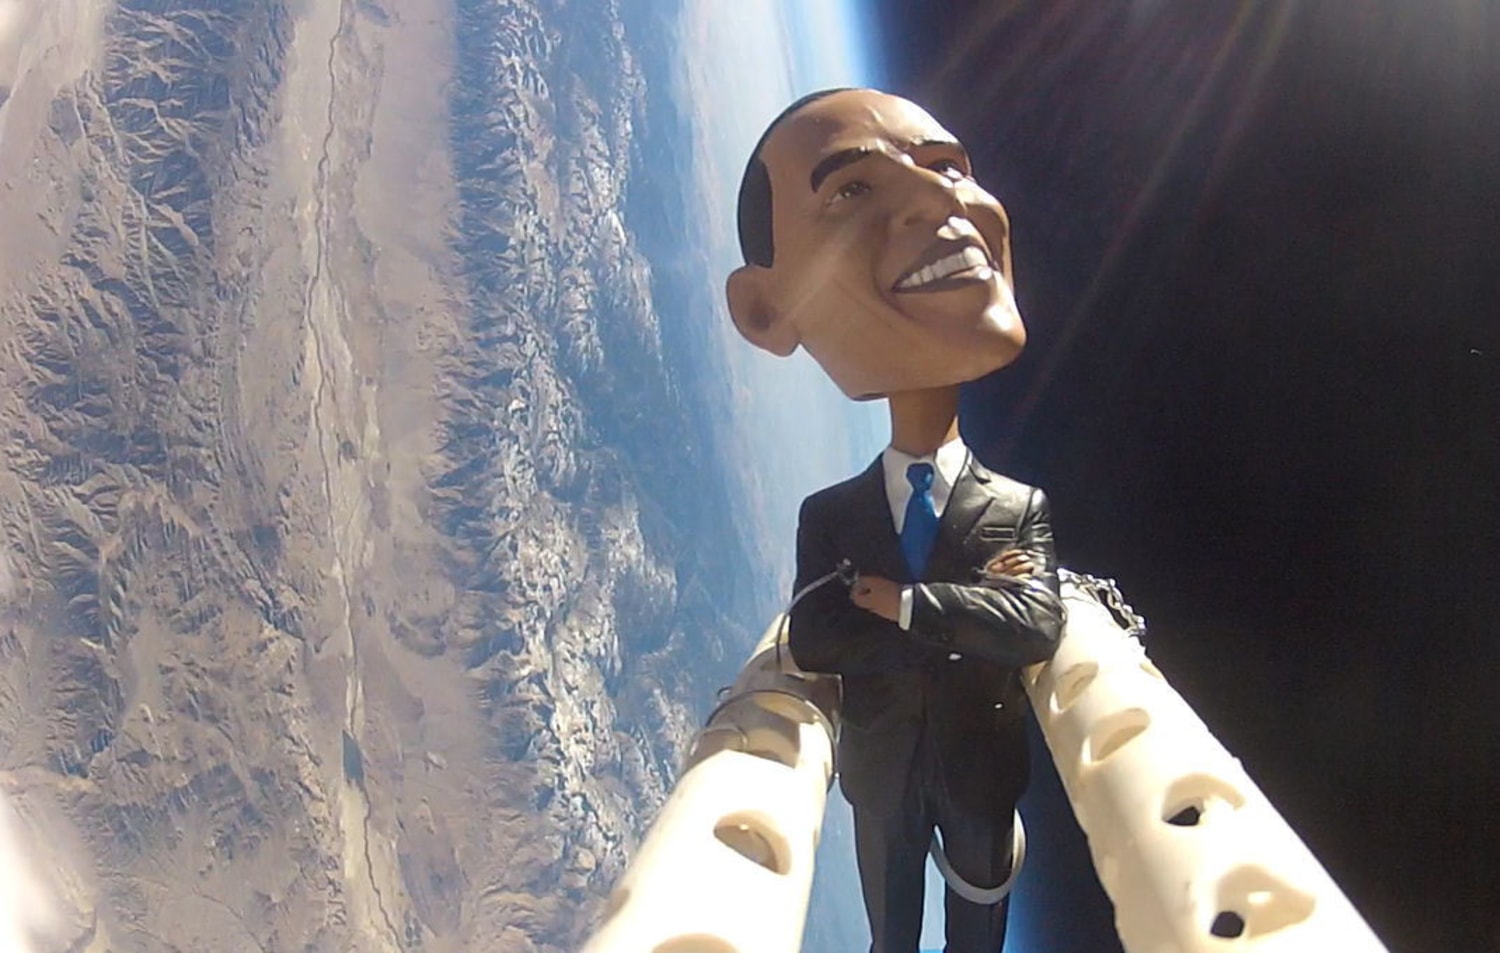 Both candidates reached for the sky — or their bobbleheads did